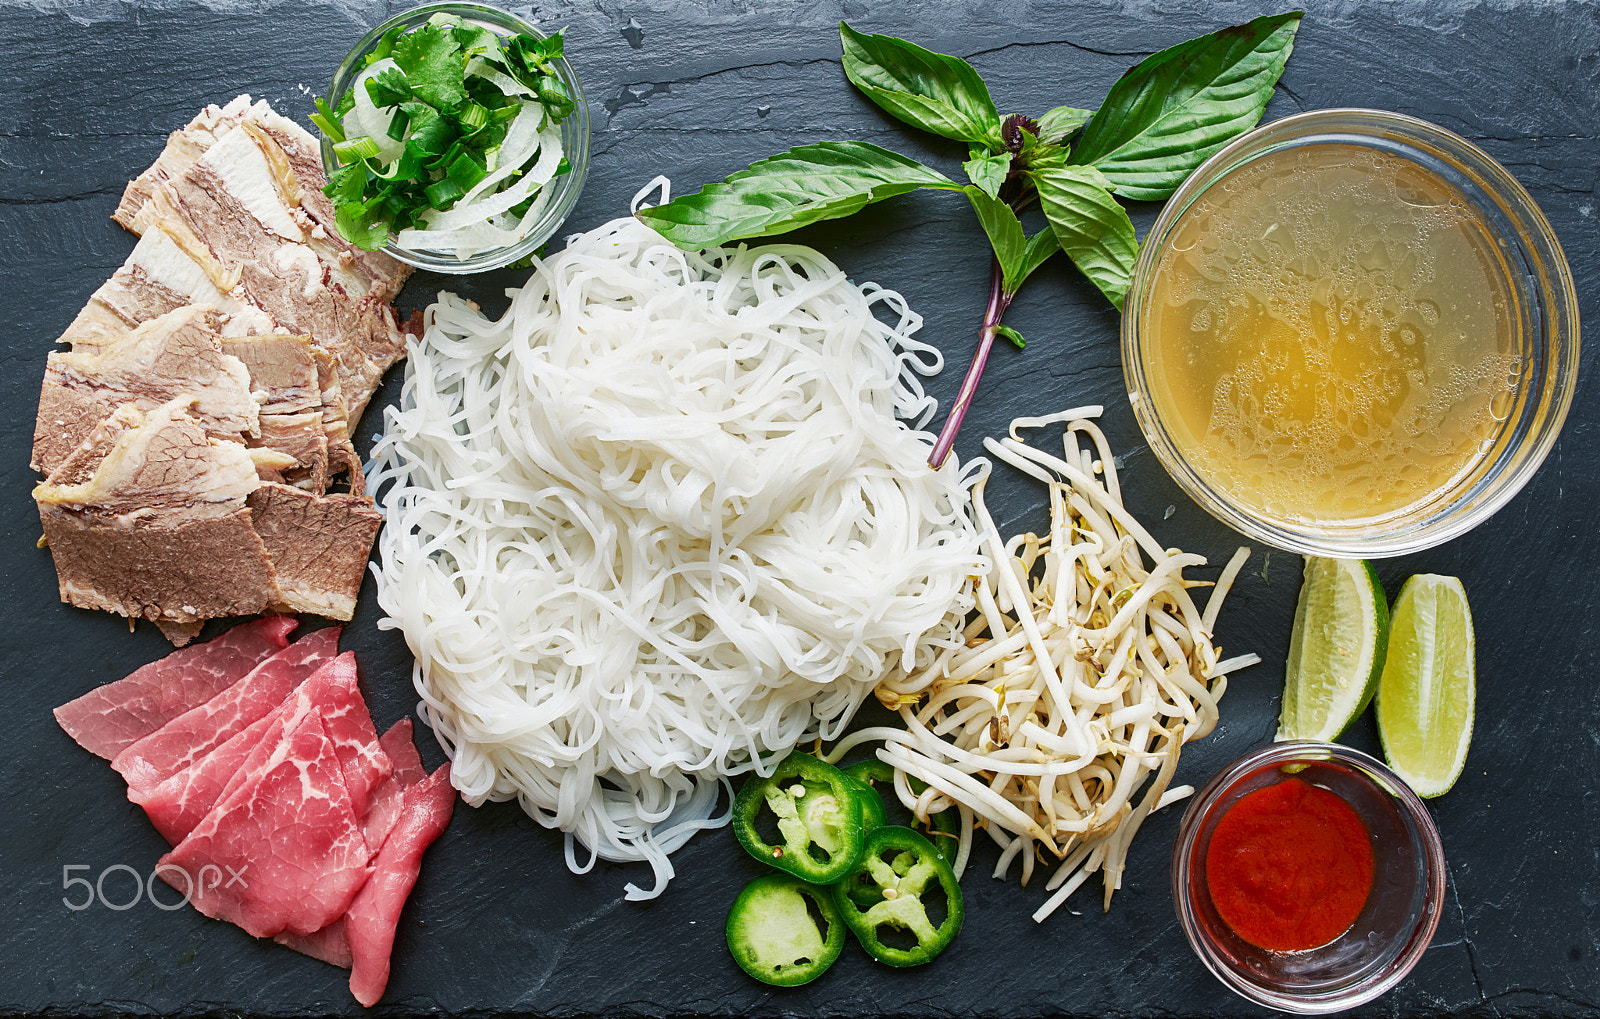 Sony a7R II sample photo. Deconstructed pho laid out with all ingredients photography